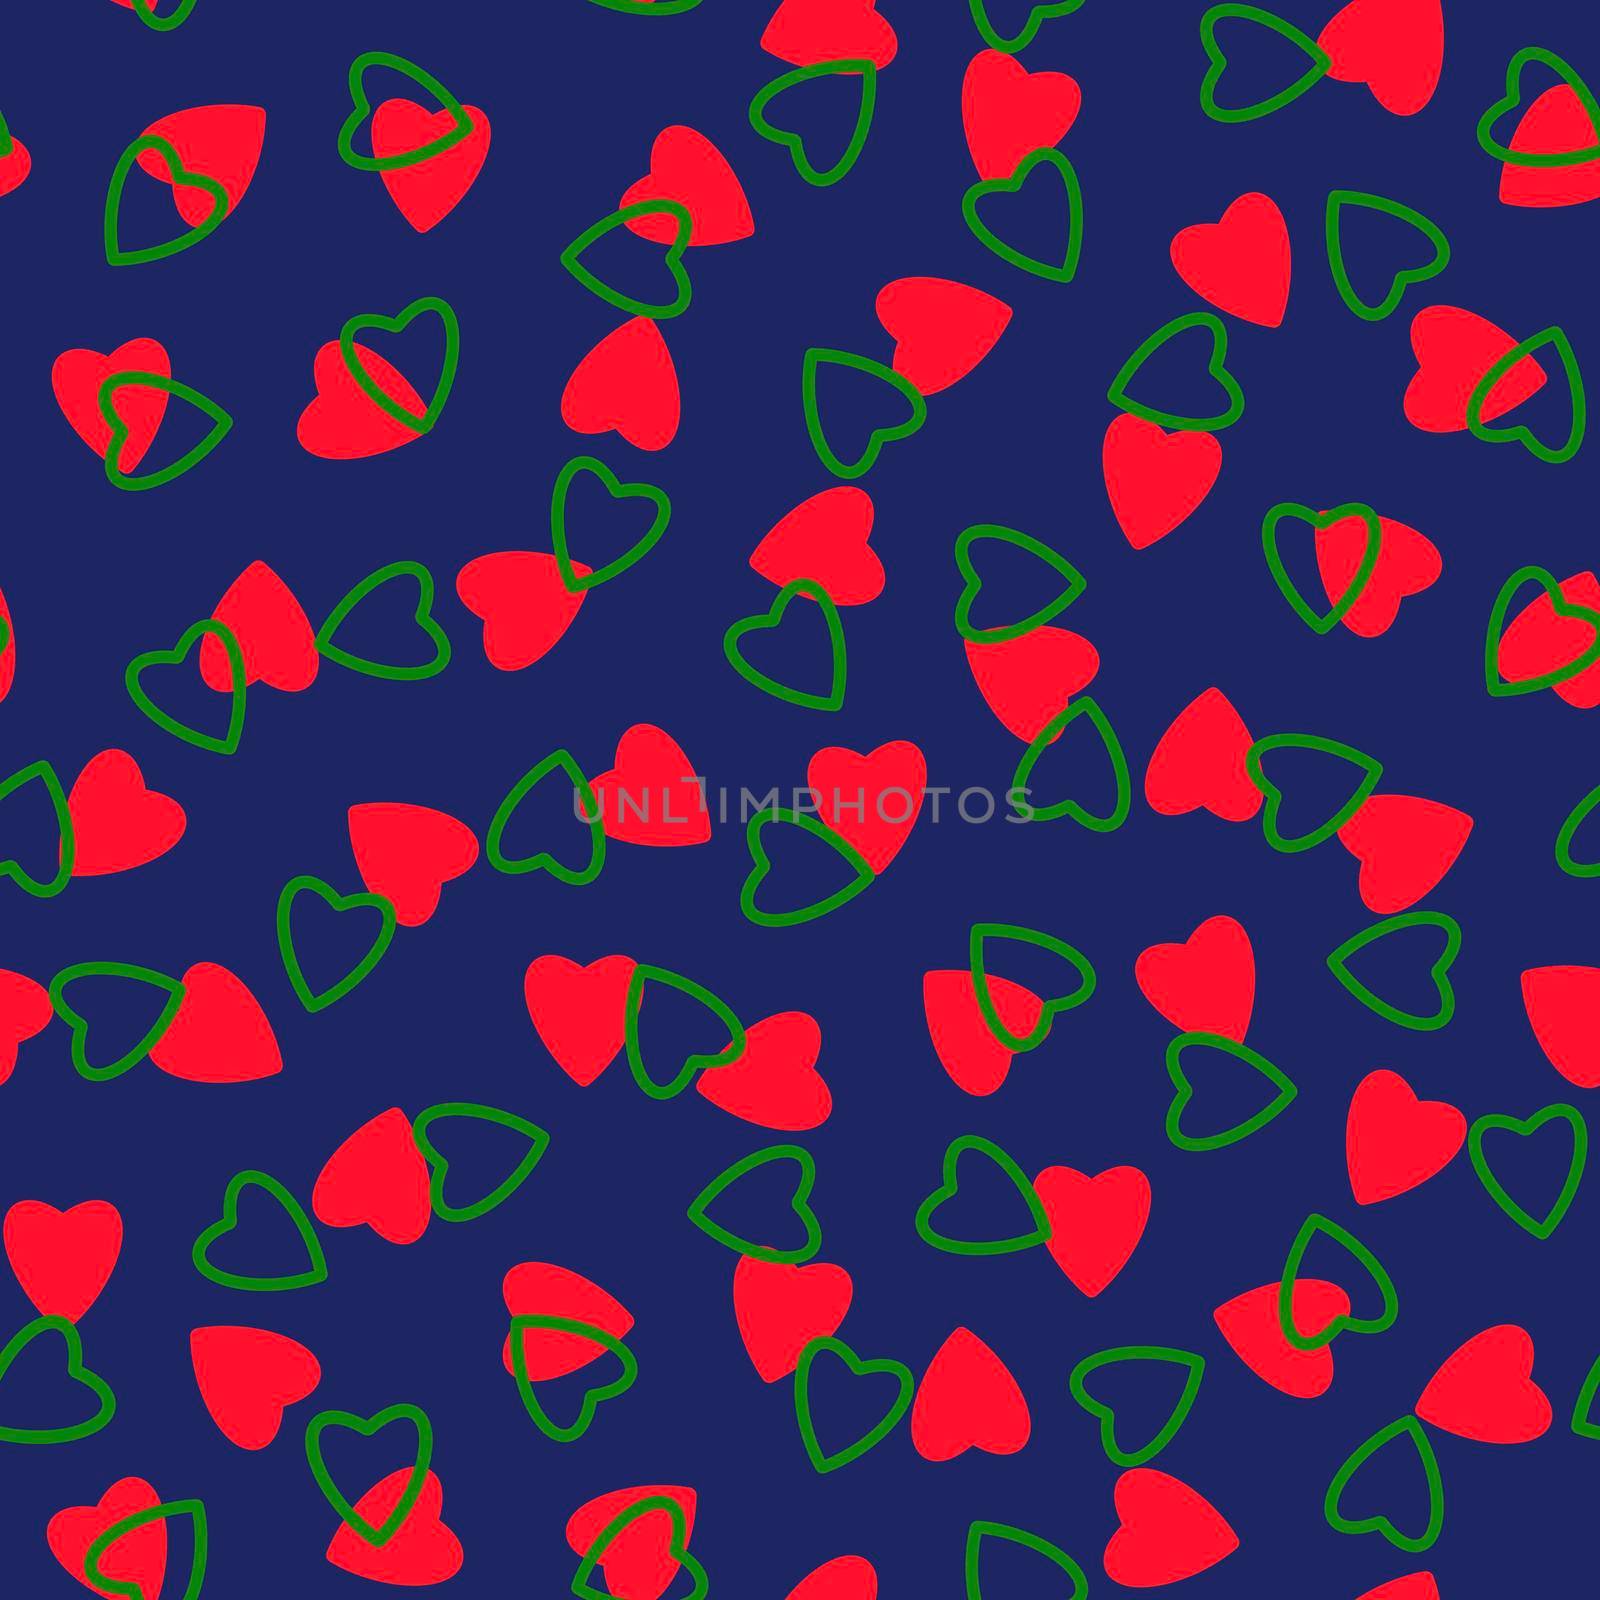 Simple hearts seamless pattern,endless chaotic texture made of tiny heart silhouettes.Valentines,mothers day background.Great for Easter,wedding,scrapbook,gift wrapping paper,textiles.Red,green,blue by Angelsmoon